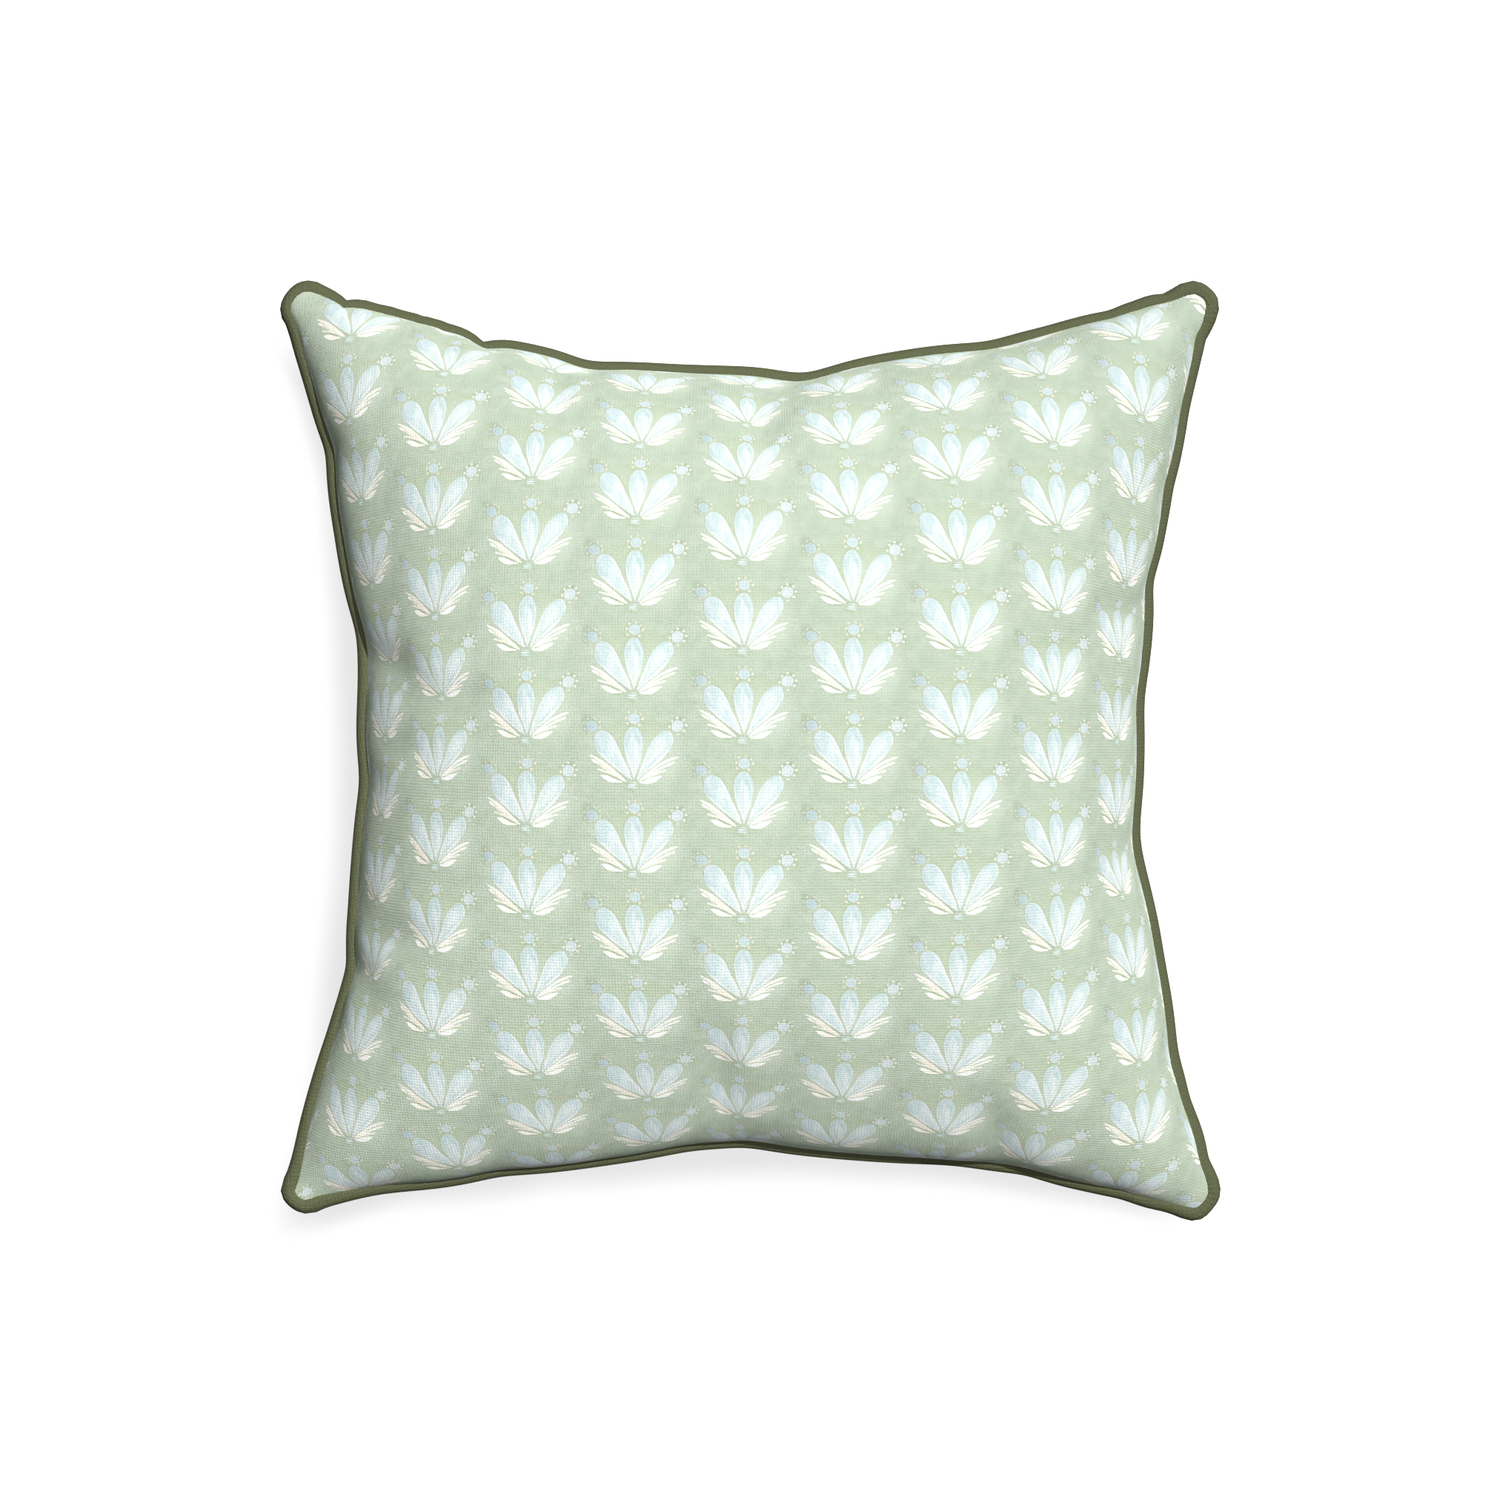 20-square serena sea salt custom pillow with f piping on white background